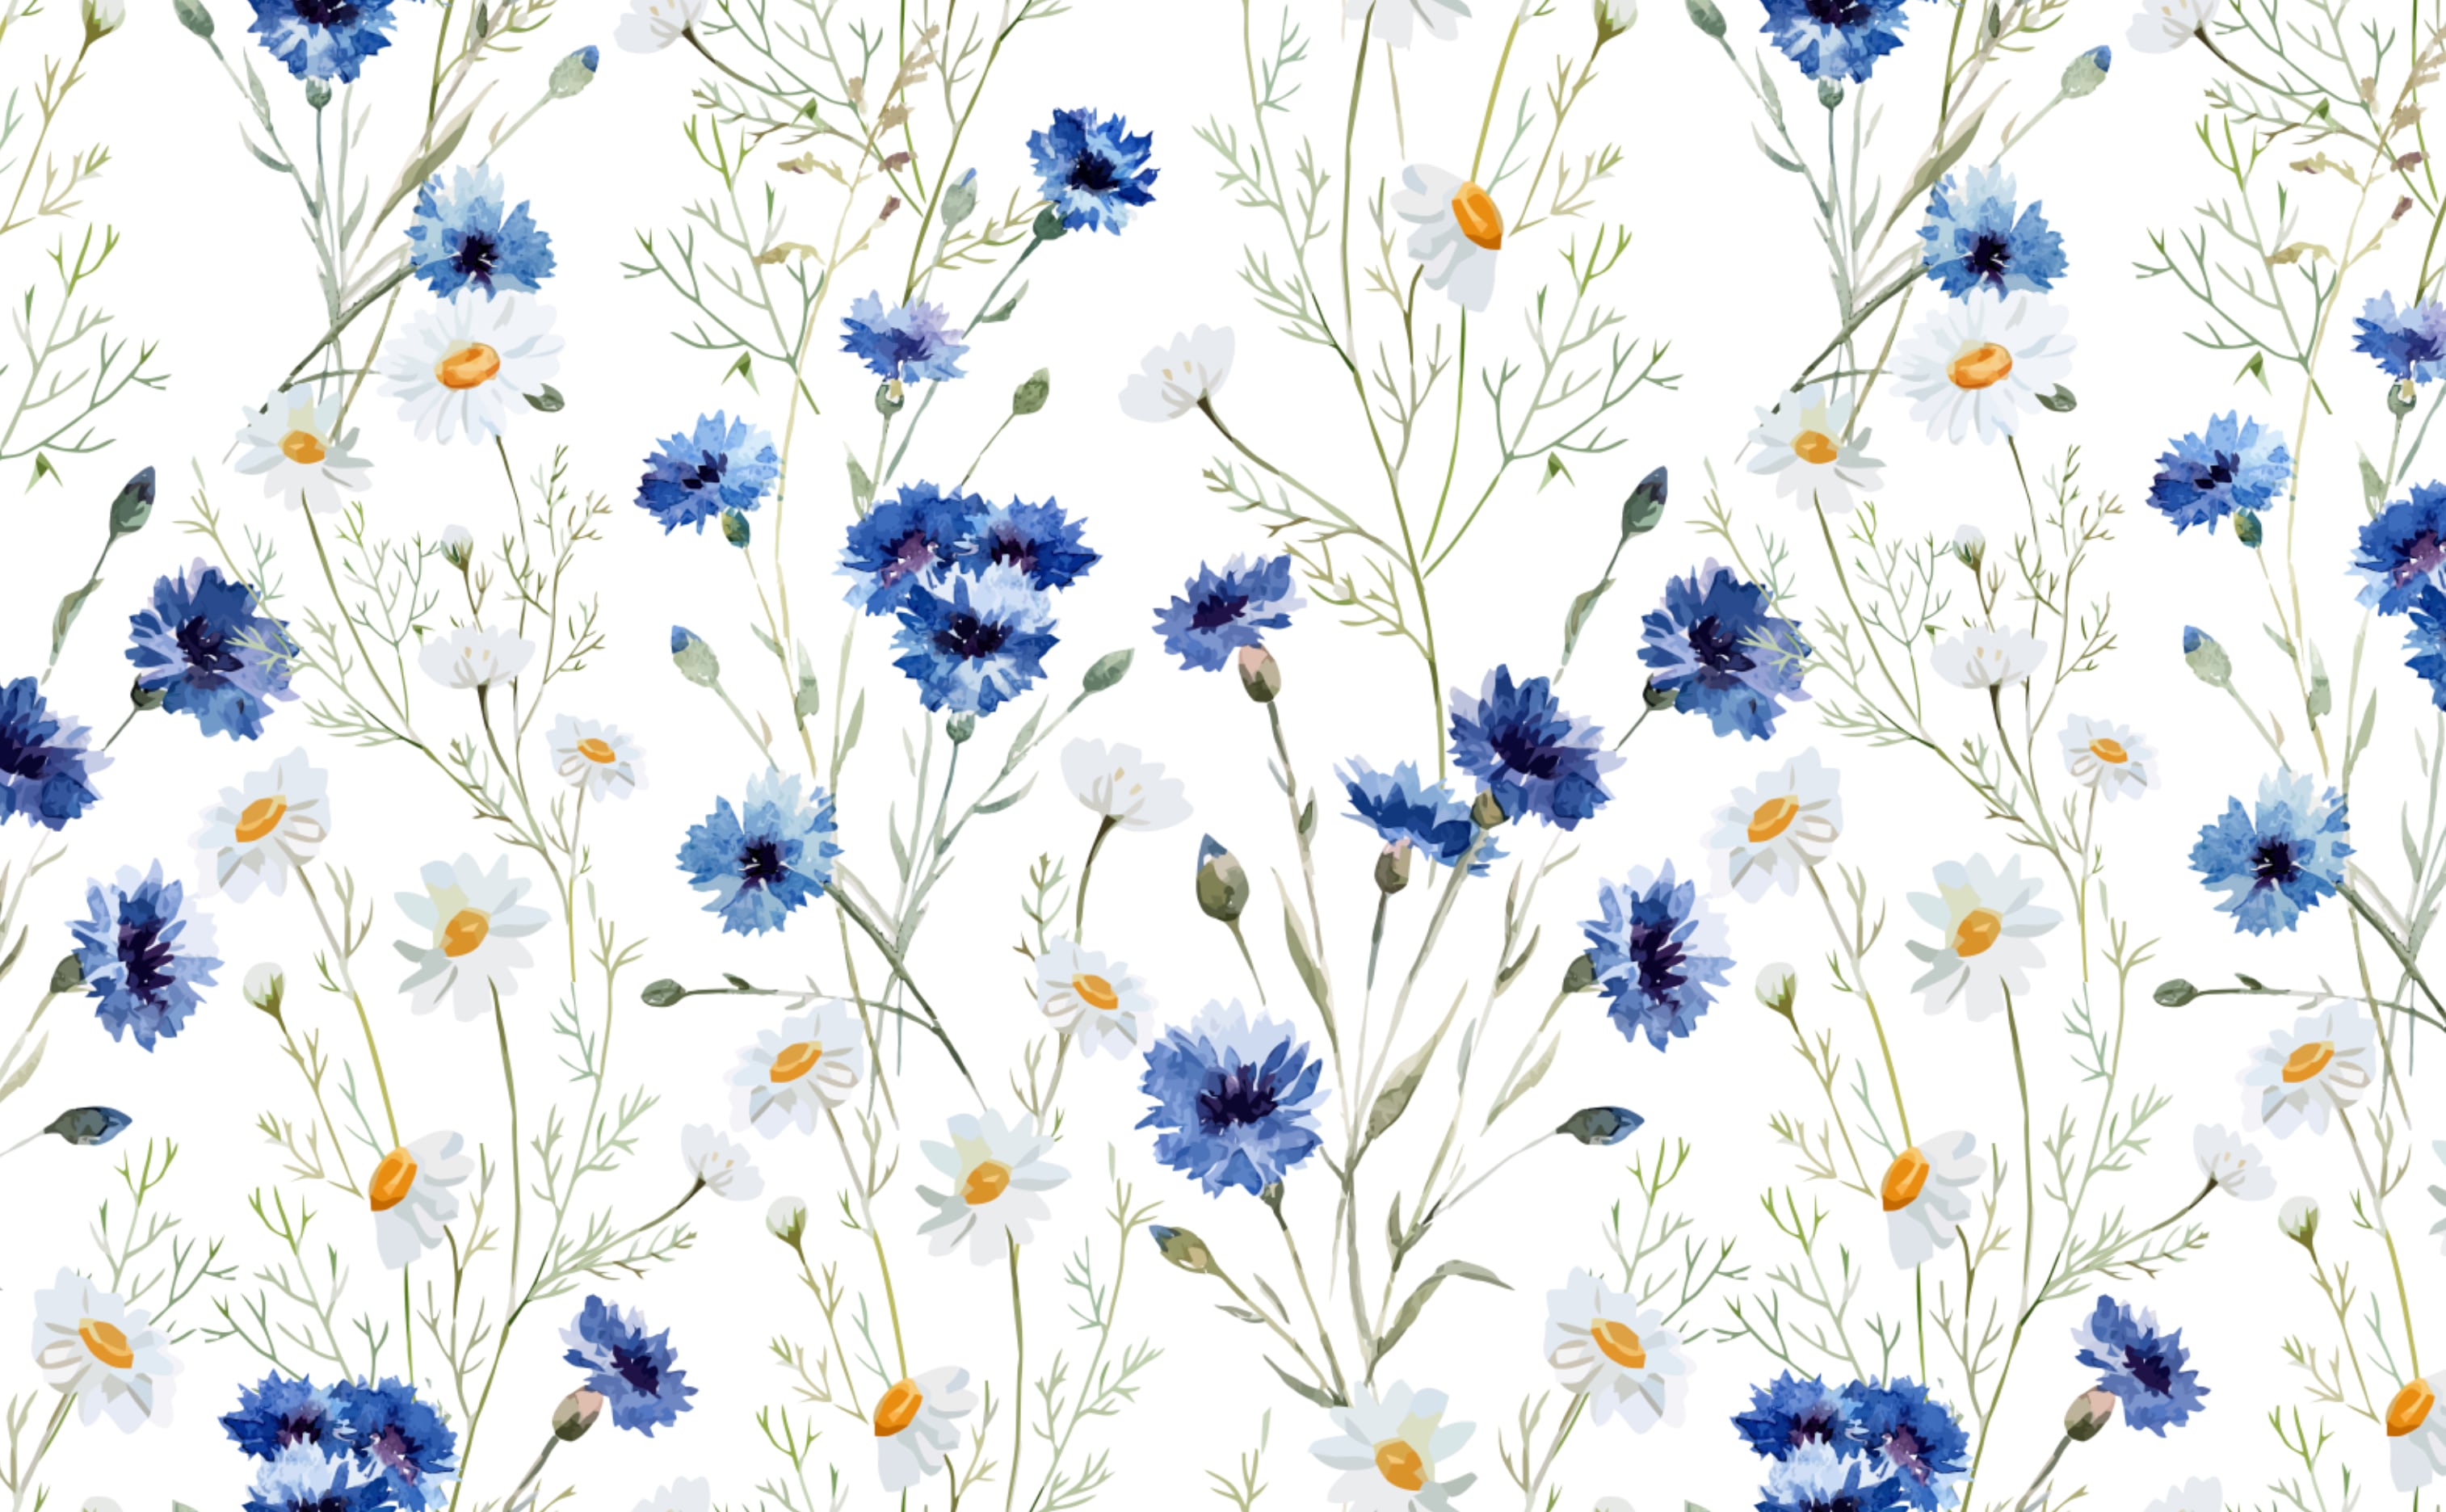 Airy Flower Pattern Wallpaper For Walls Daisy Delight Images, Photos, Reviews